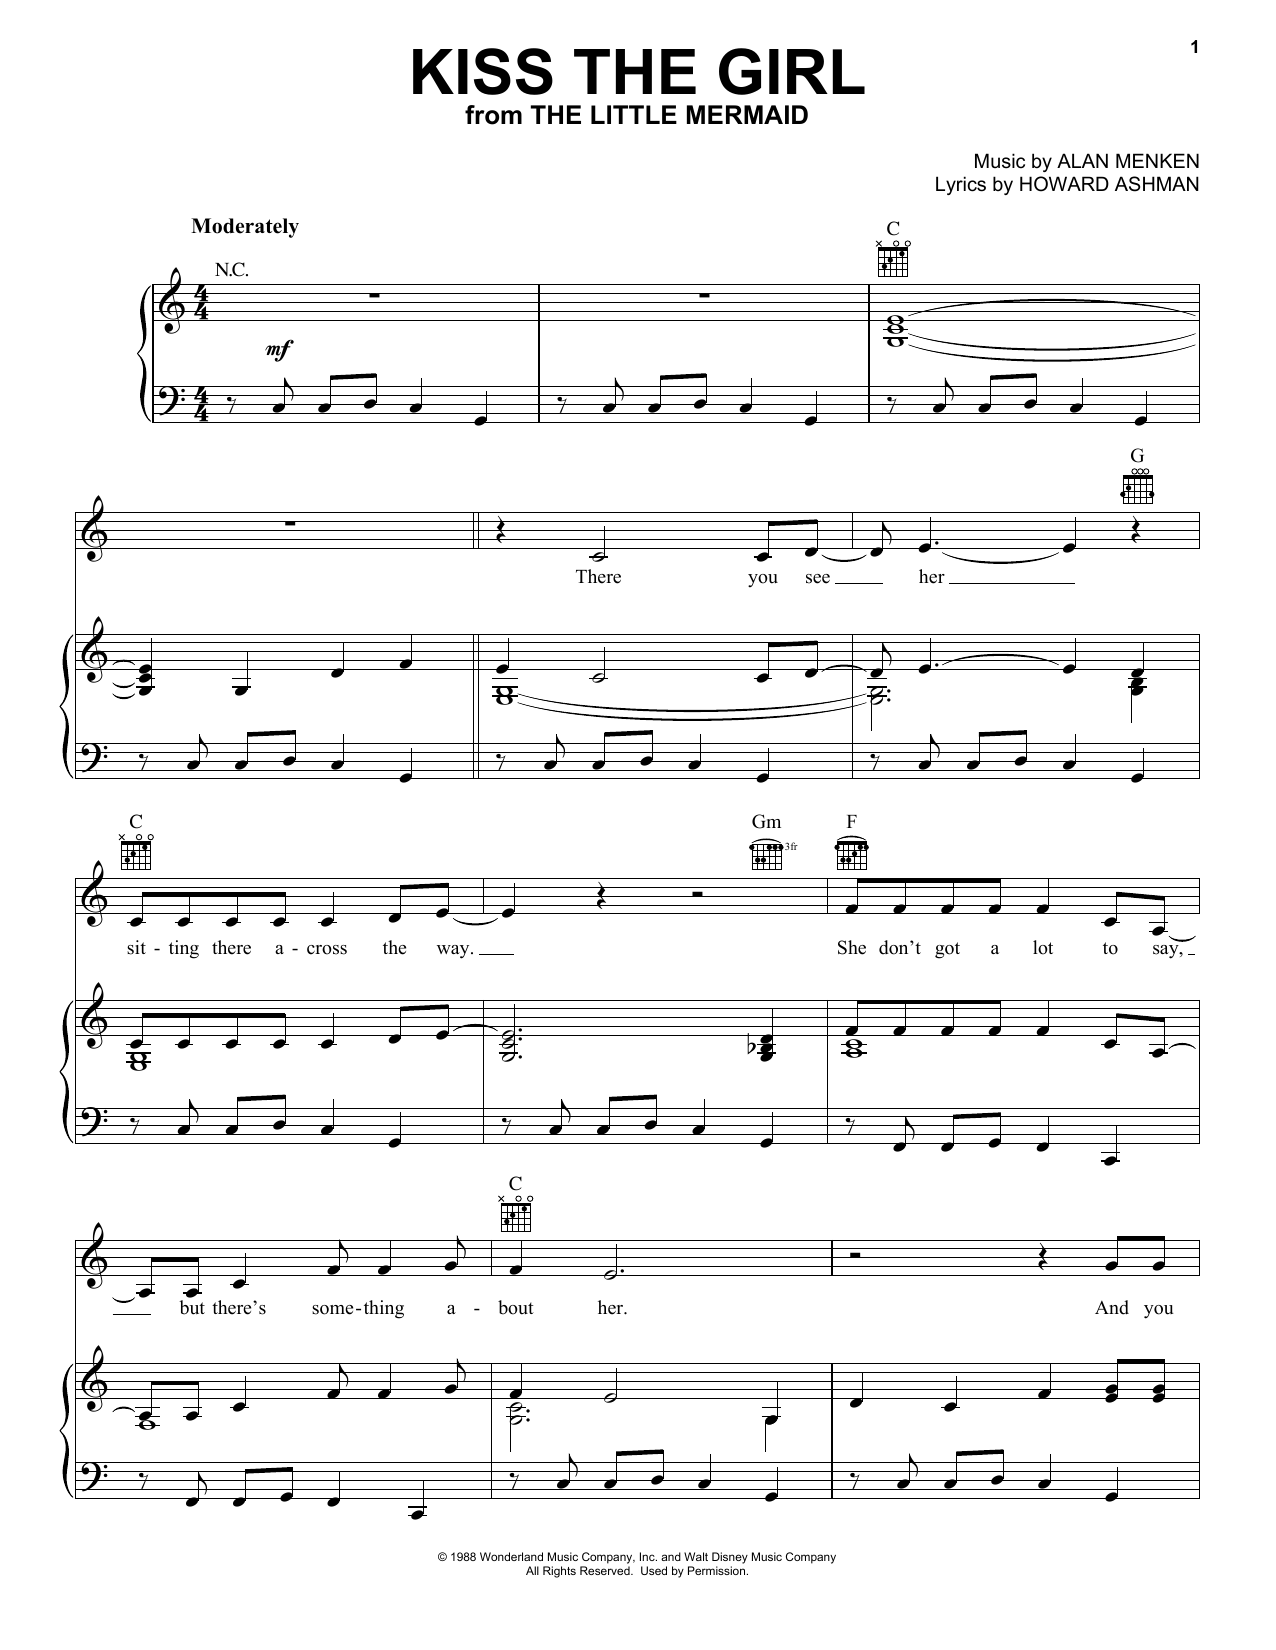 Alan Menken Kiss The Girl (from The Little Mermaid) sheet music notes and chords. Download Printable PDF.